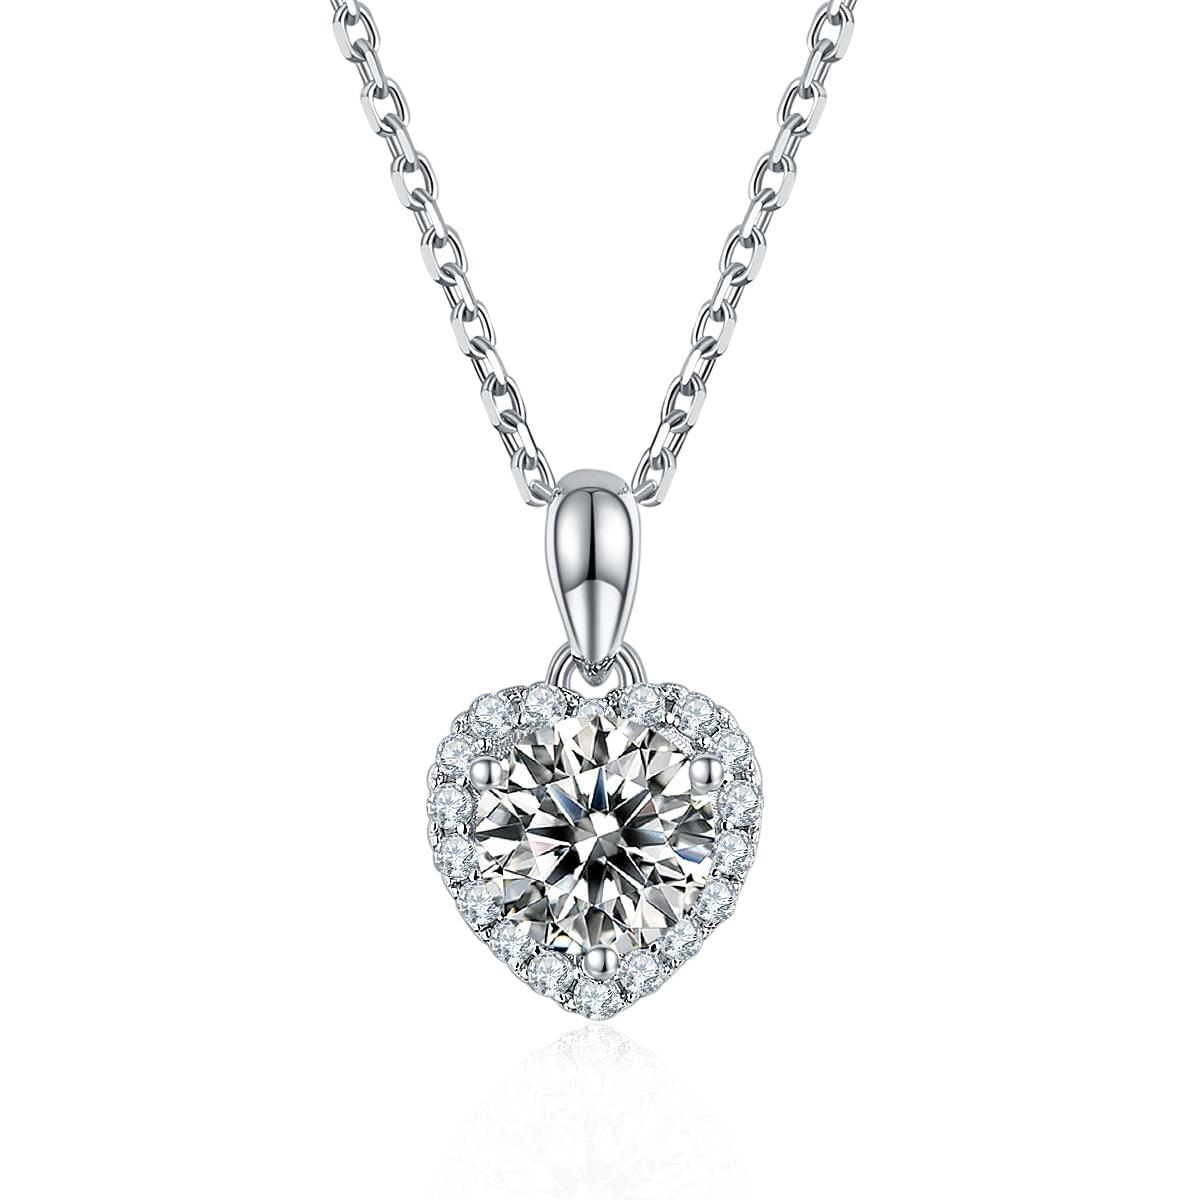 925 Silver Moissanite Diamond Jewelry Set with 1.5 Ct Pendant Necklace, 0.5 Ct Stud Earring, and Bracelet for Women